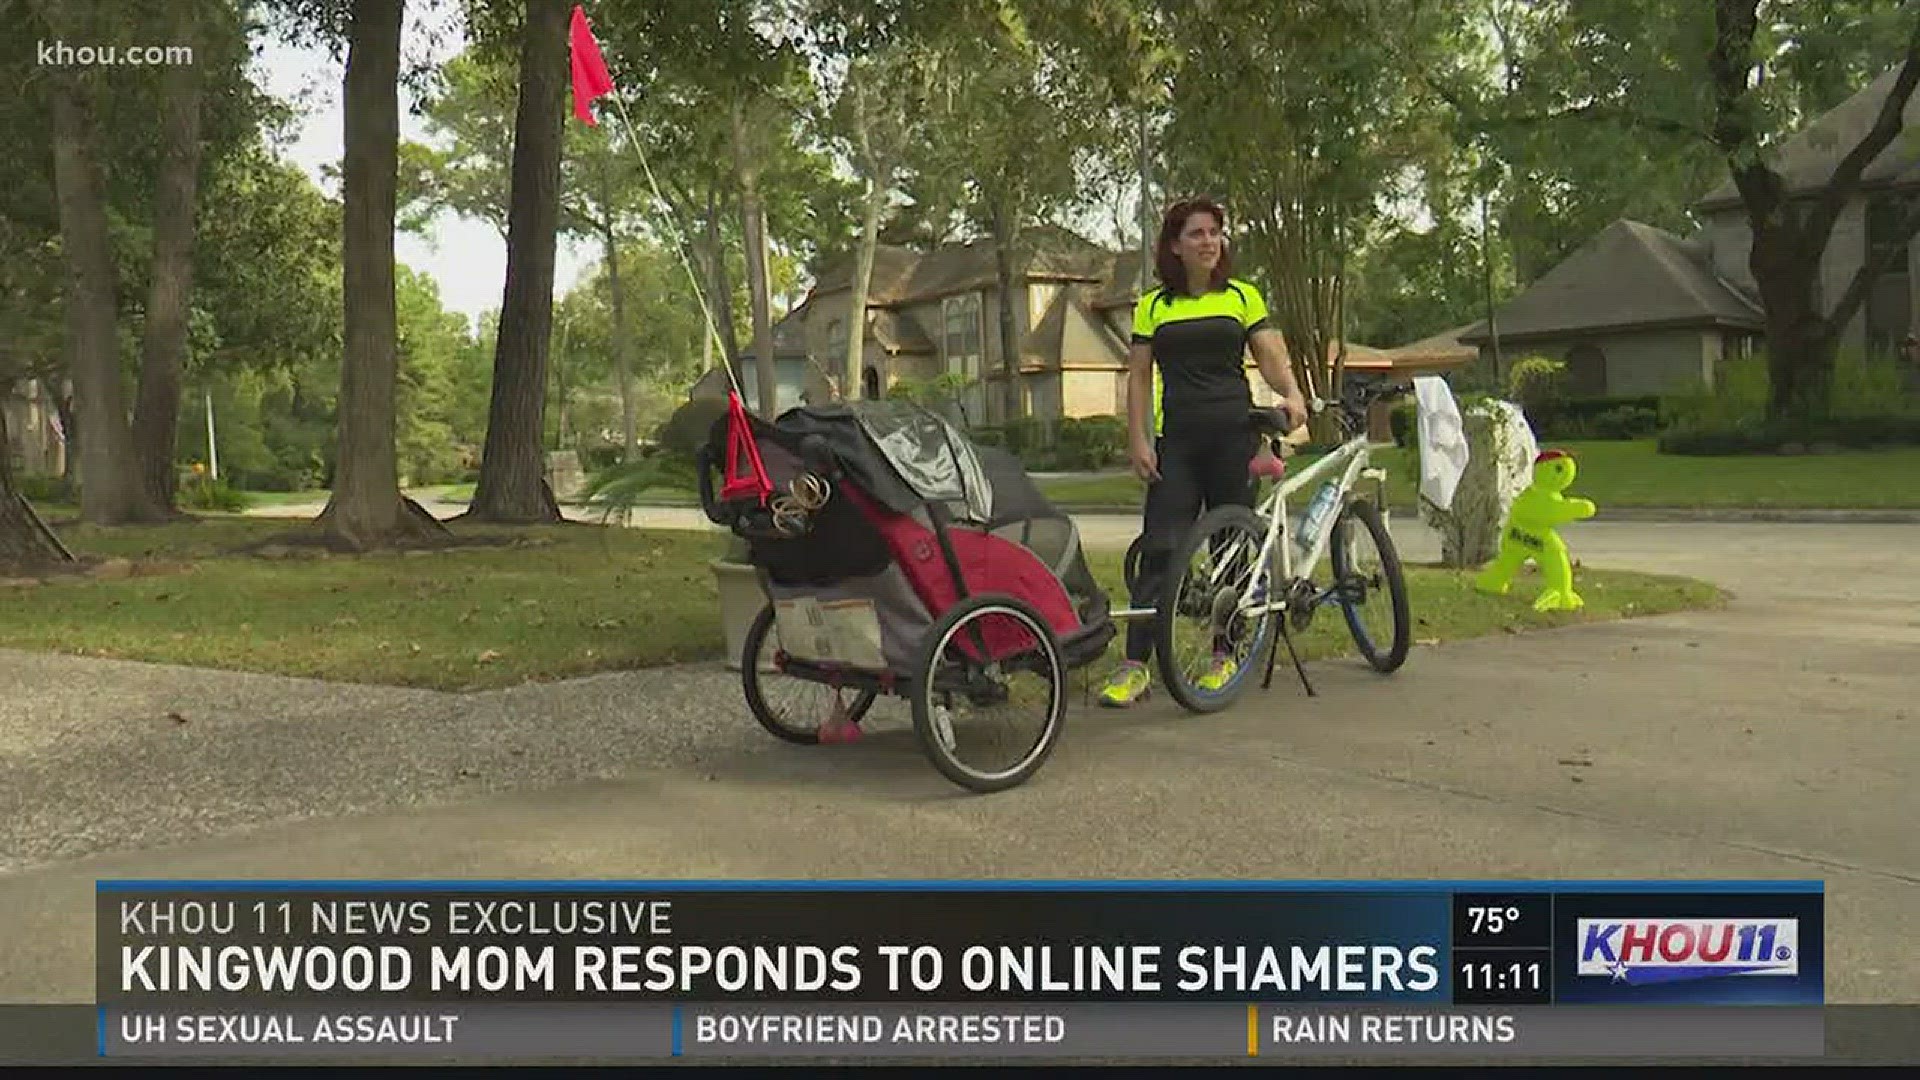 Some parents are upset with one Kingwood mom who drops off her children at different schools using her bicycle instead of waiting in the drop off line like the other parents.